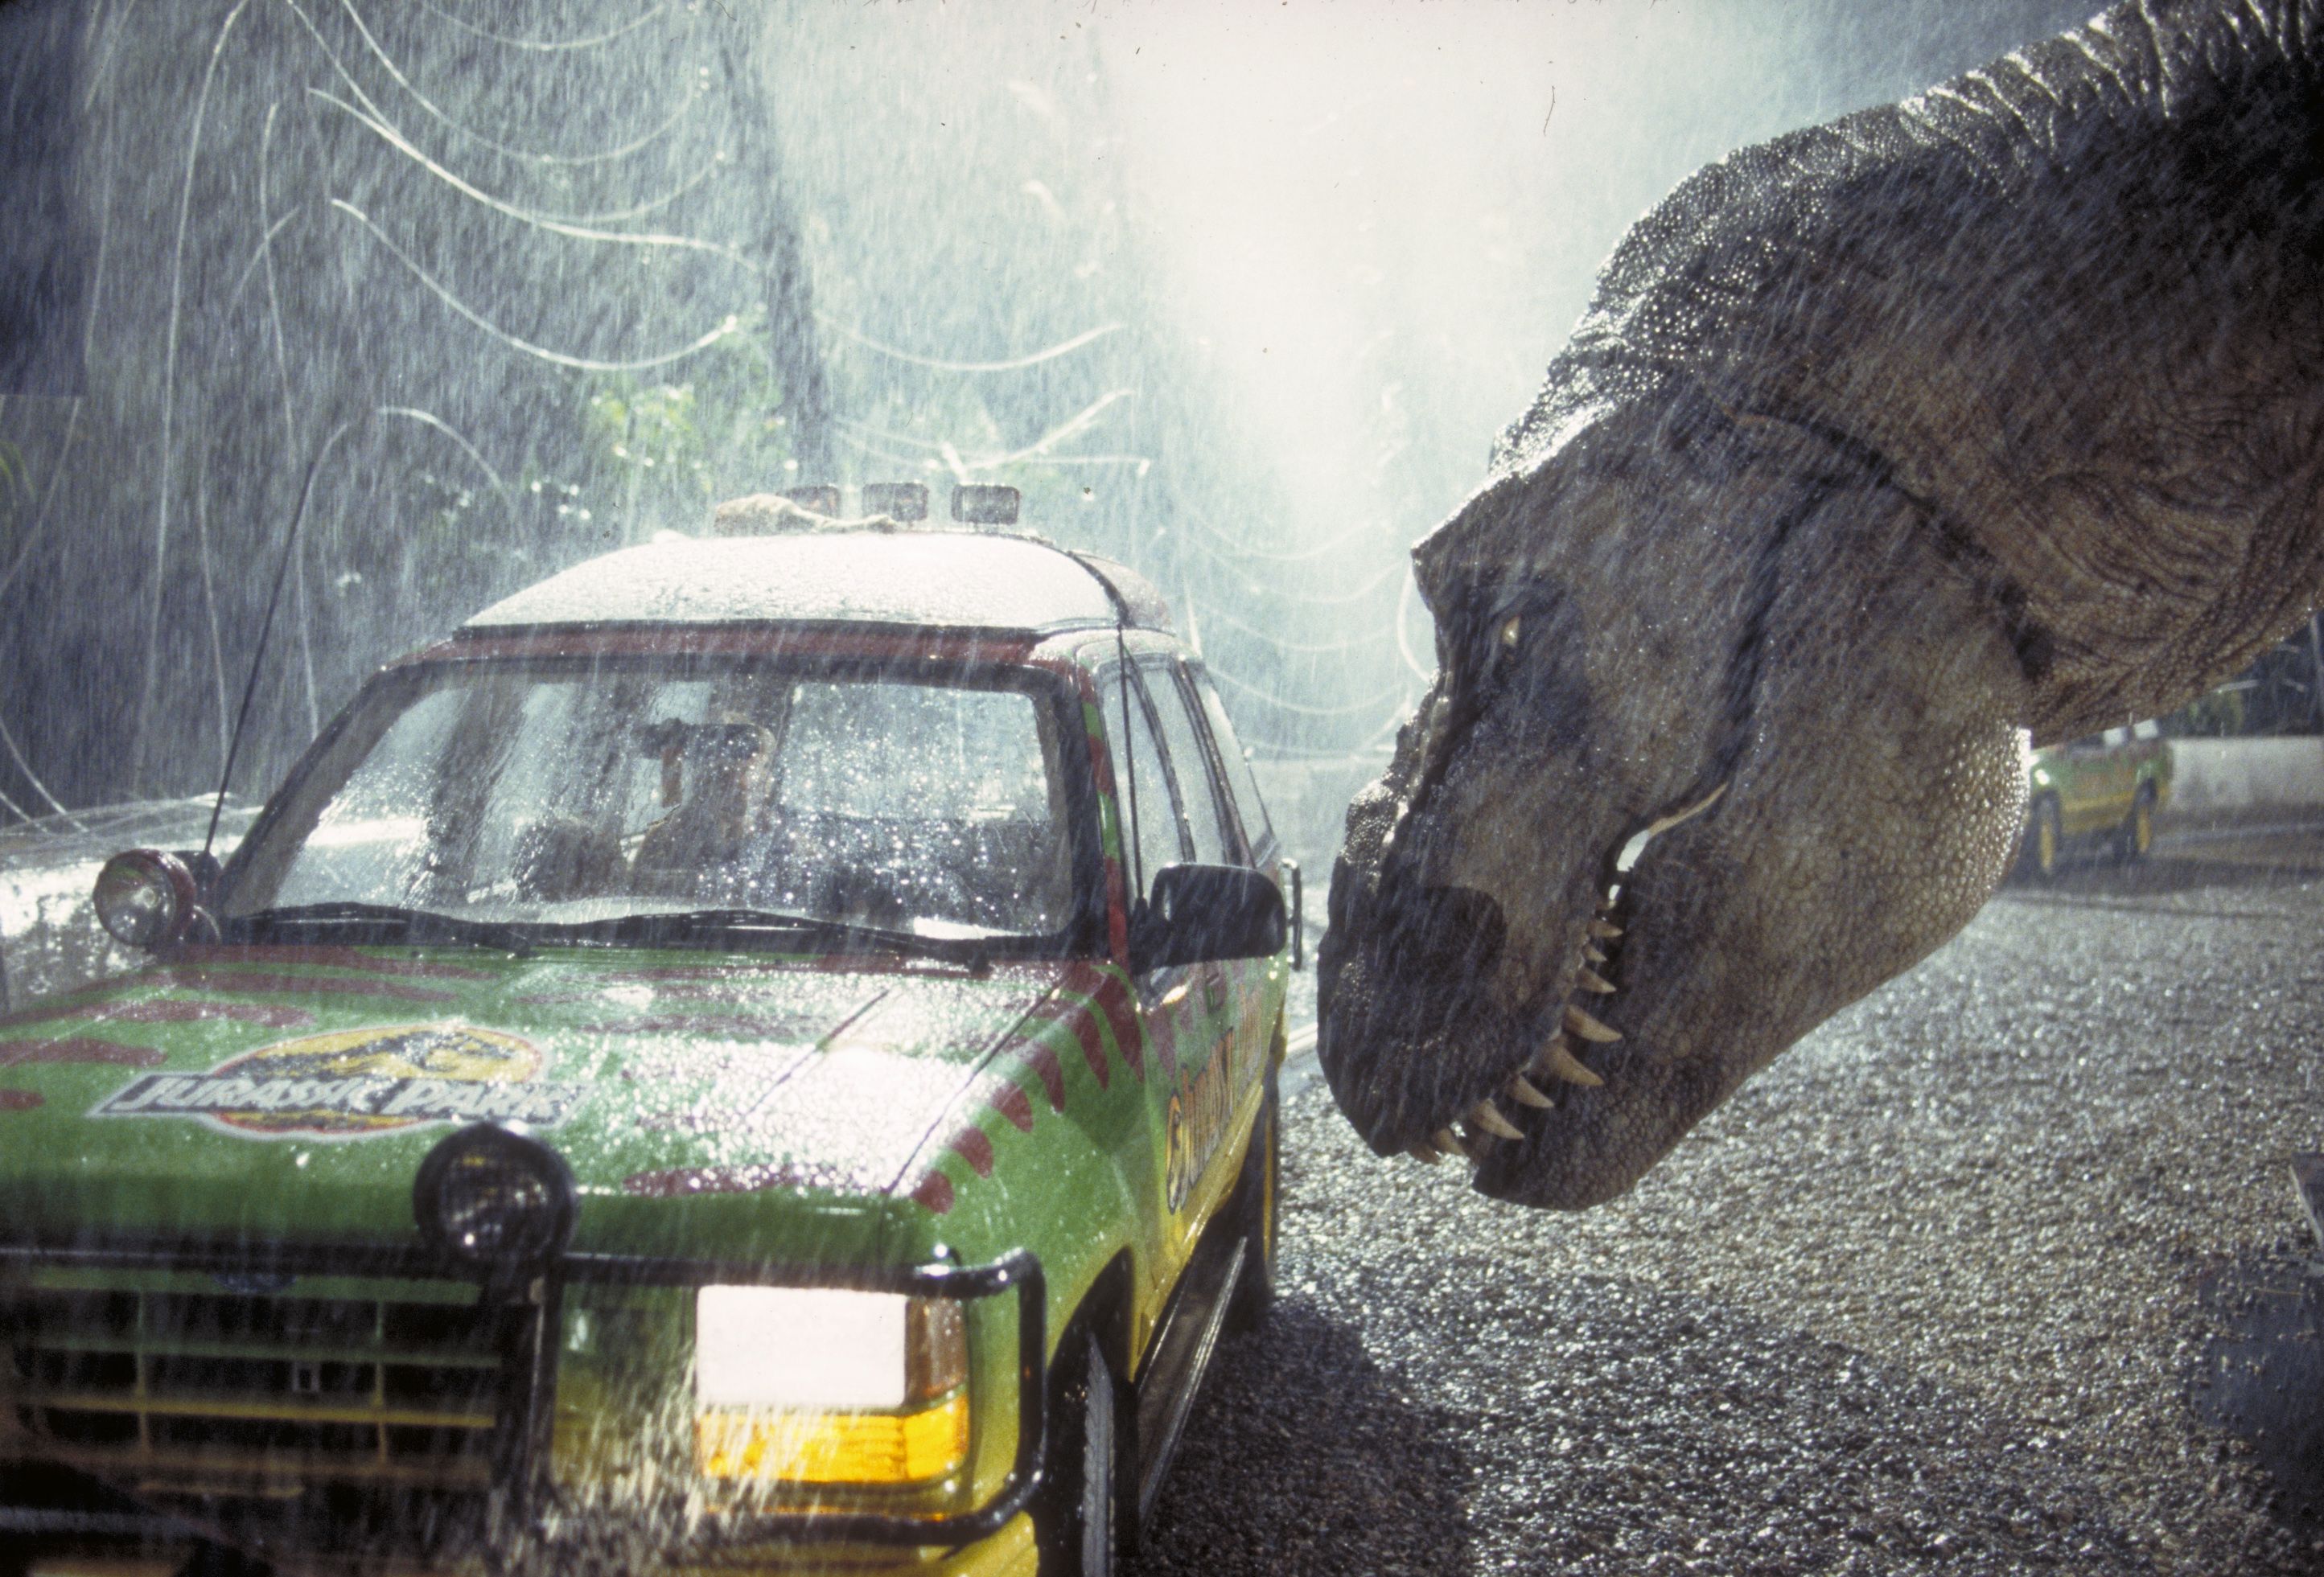 All 6 Jurassic Park and Jurassic World movies, ranked